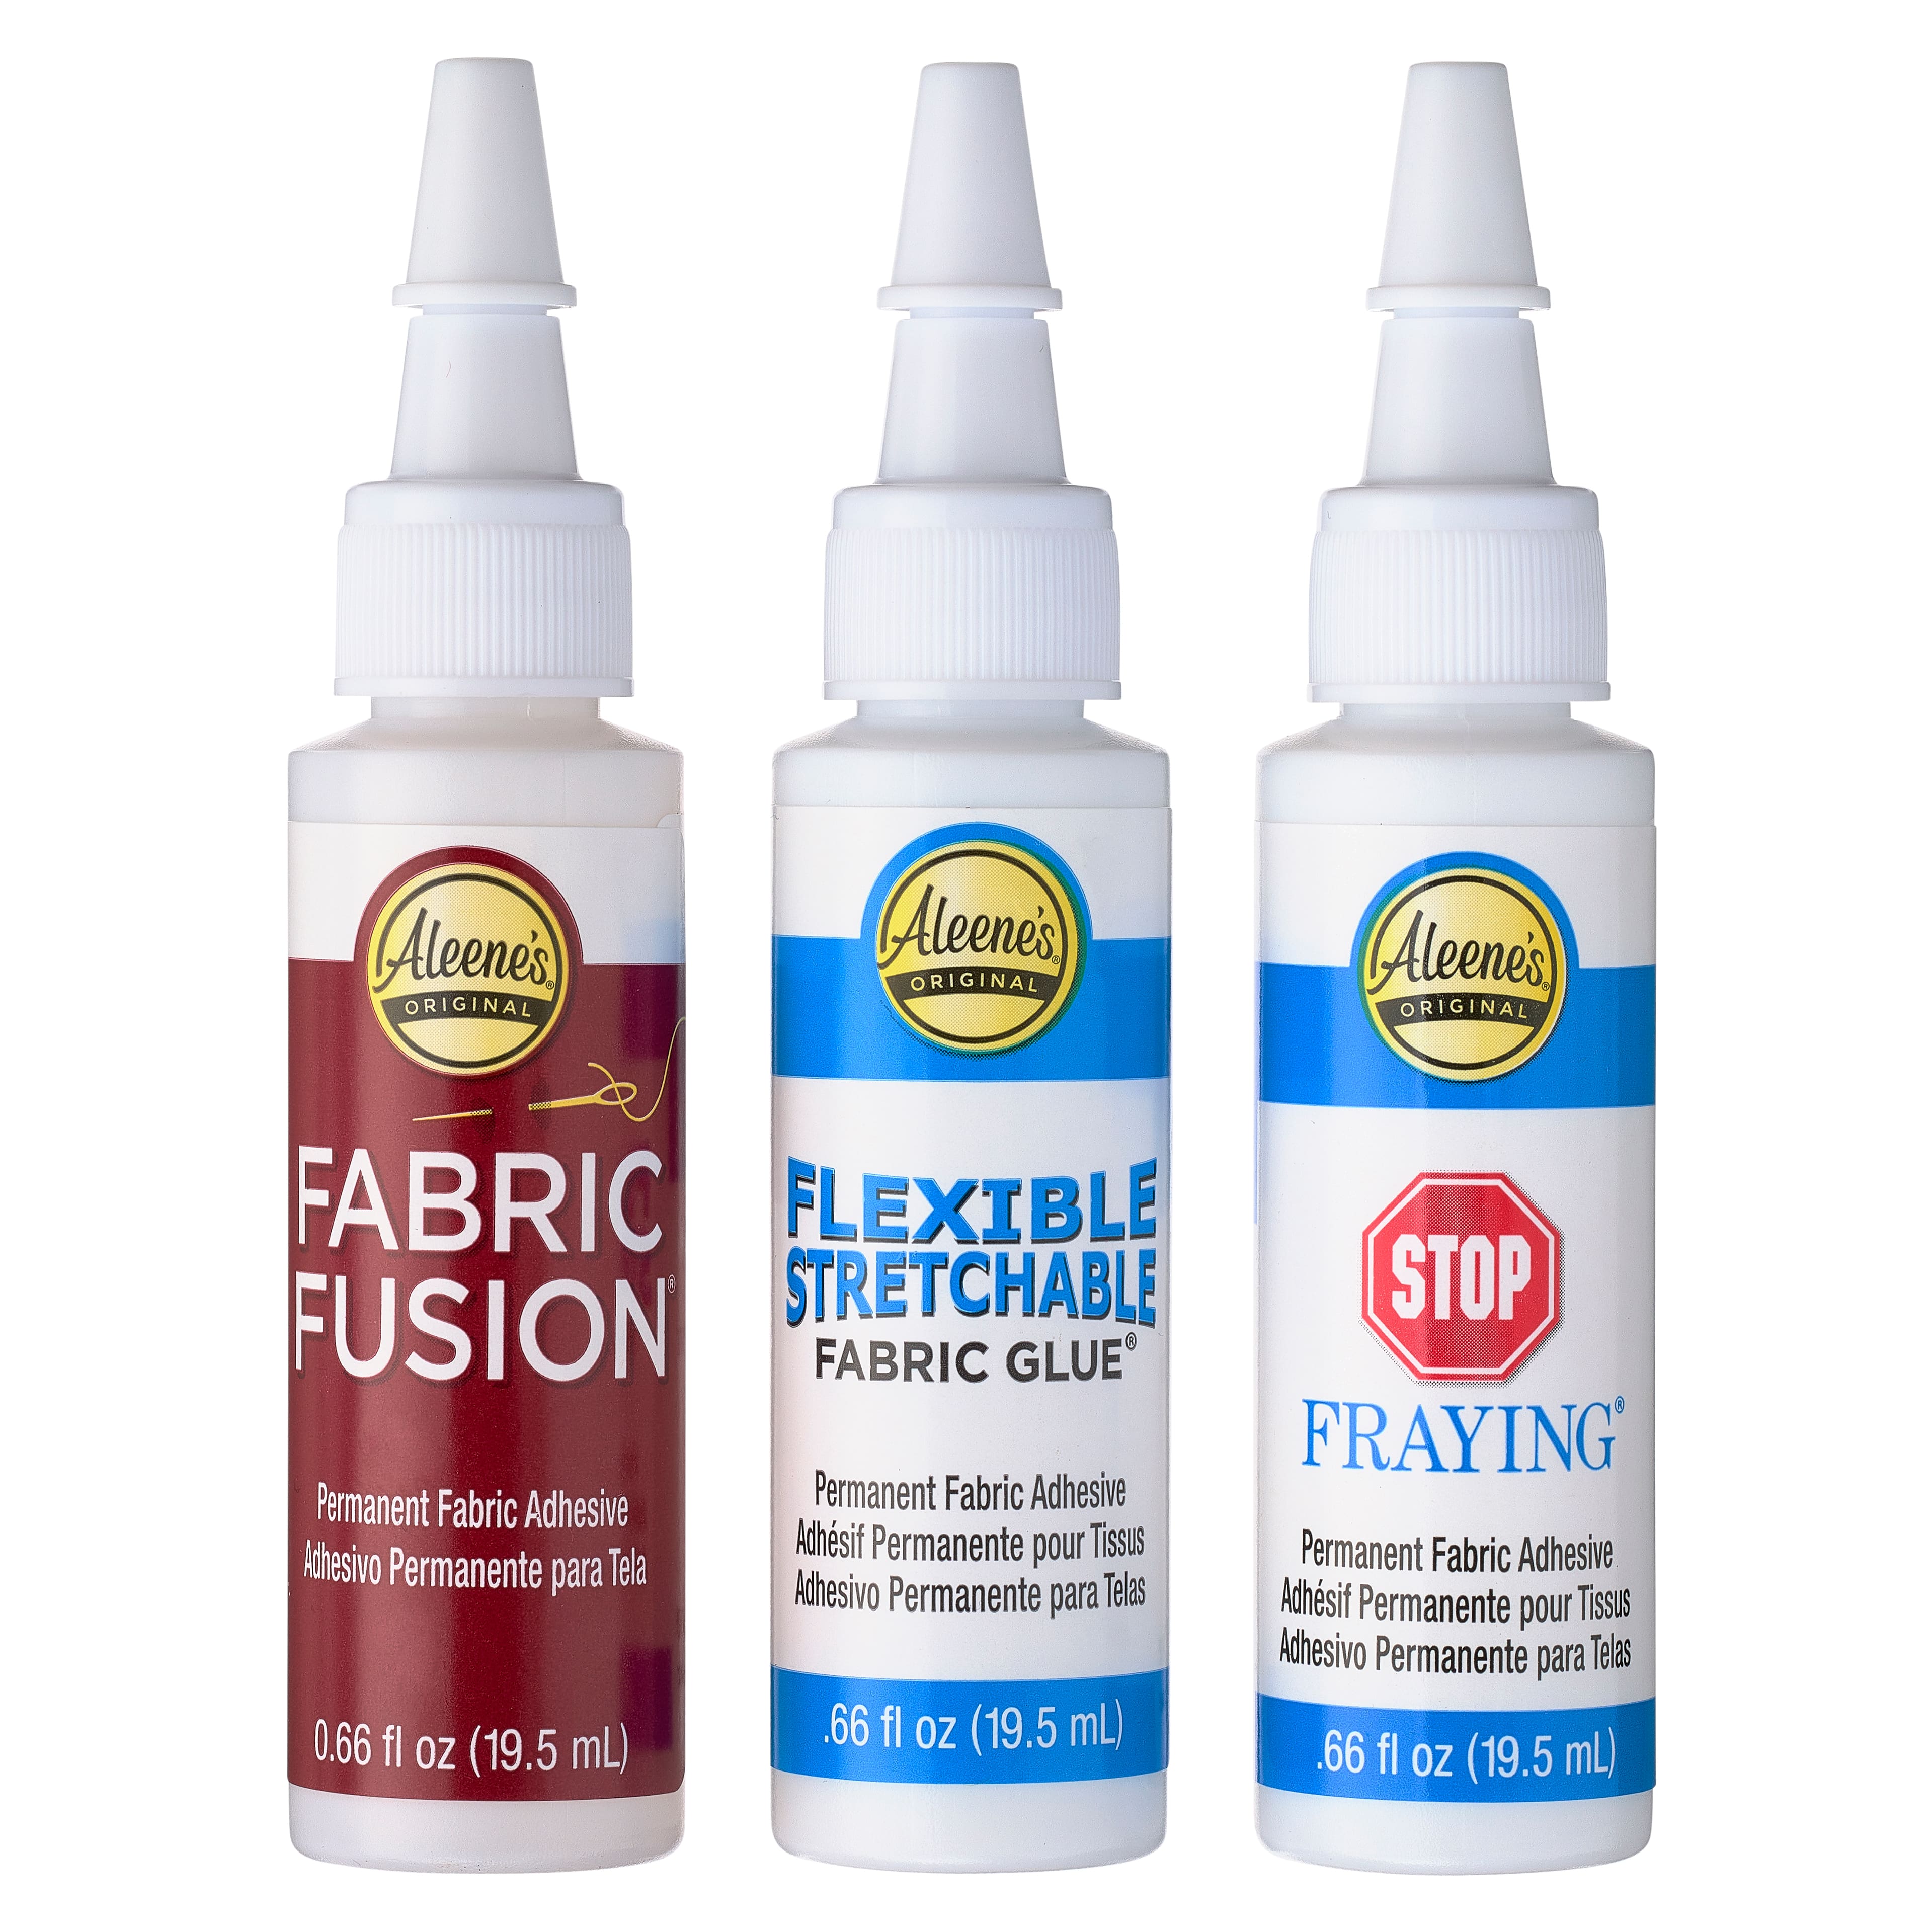 2 Pack Aleene's Flexible Stretchable Fabric Glue. 4 Ounce Bottle